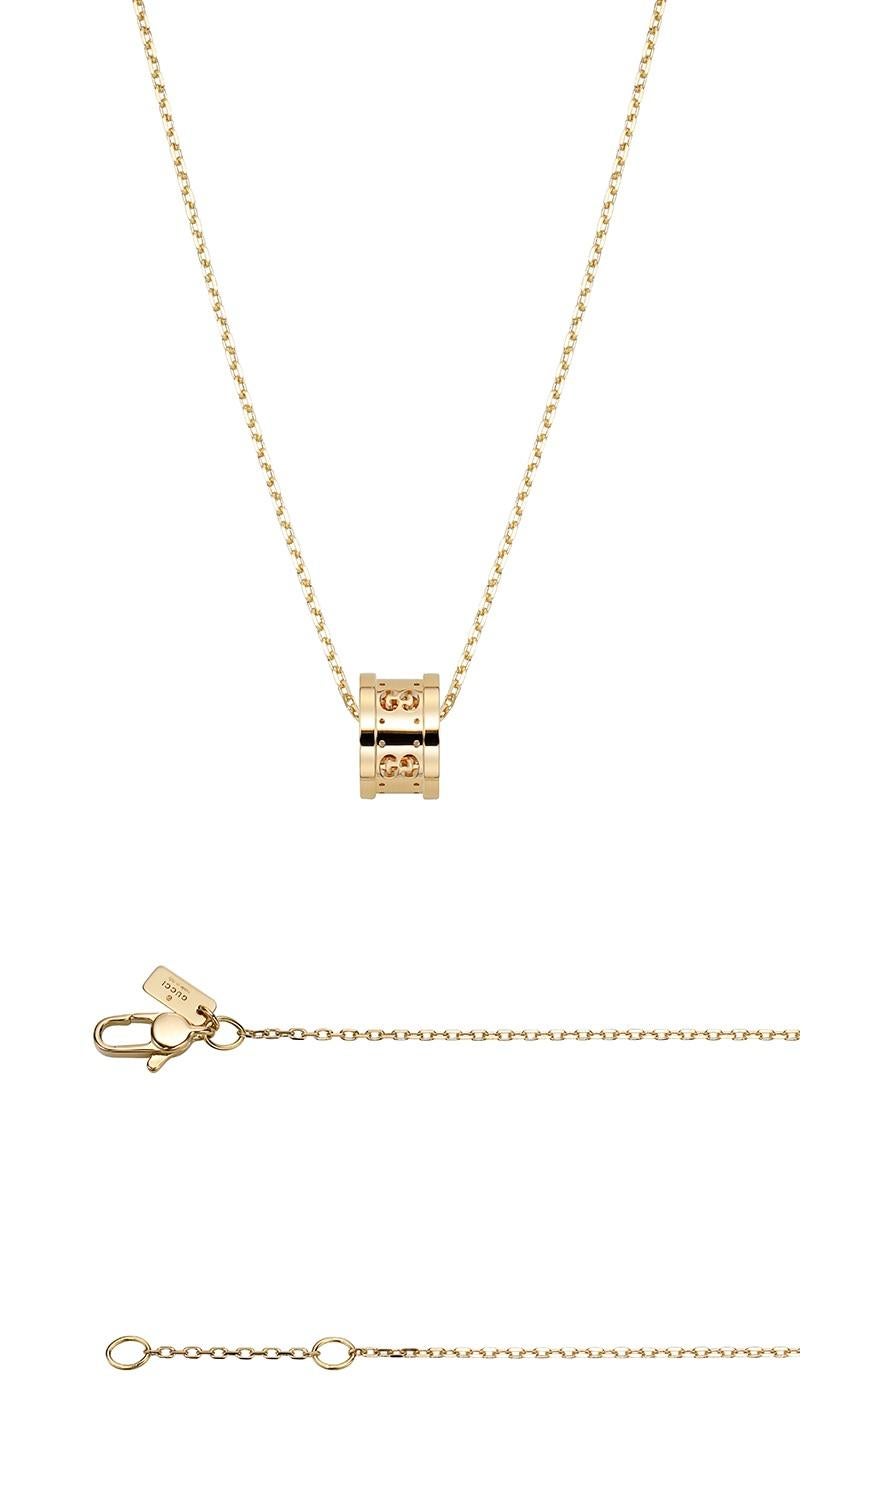 gucci icon necklace in yellow gold